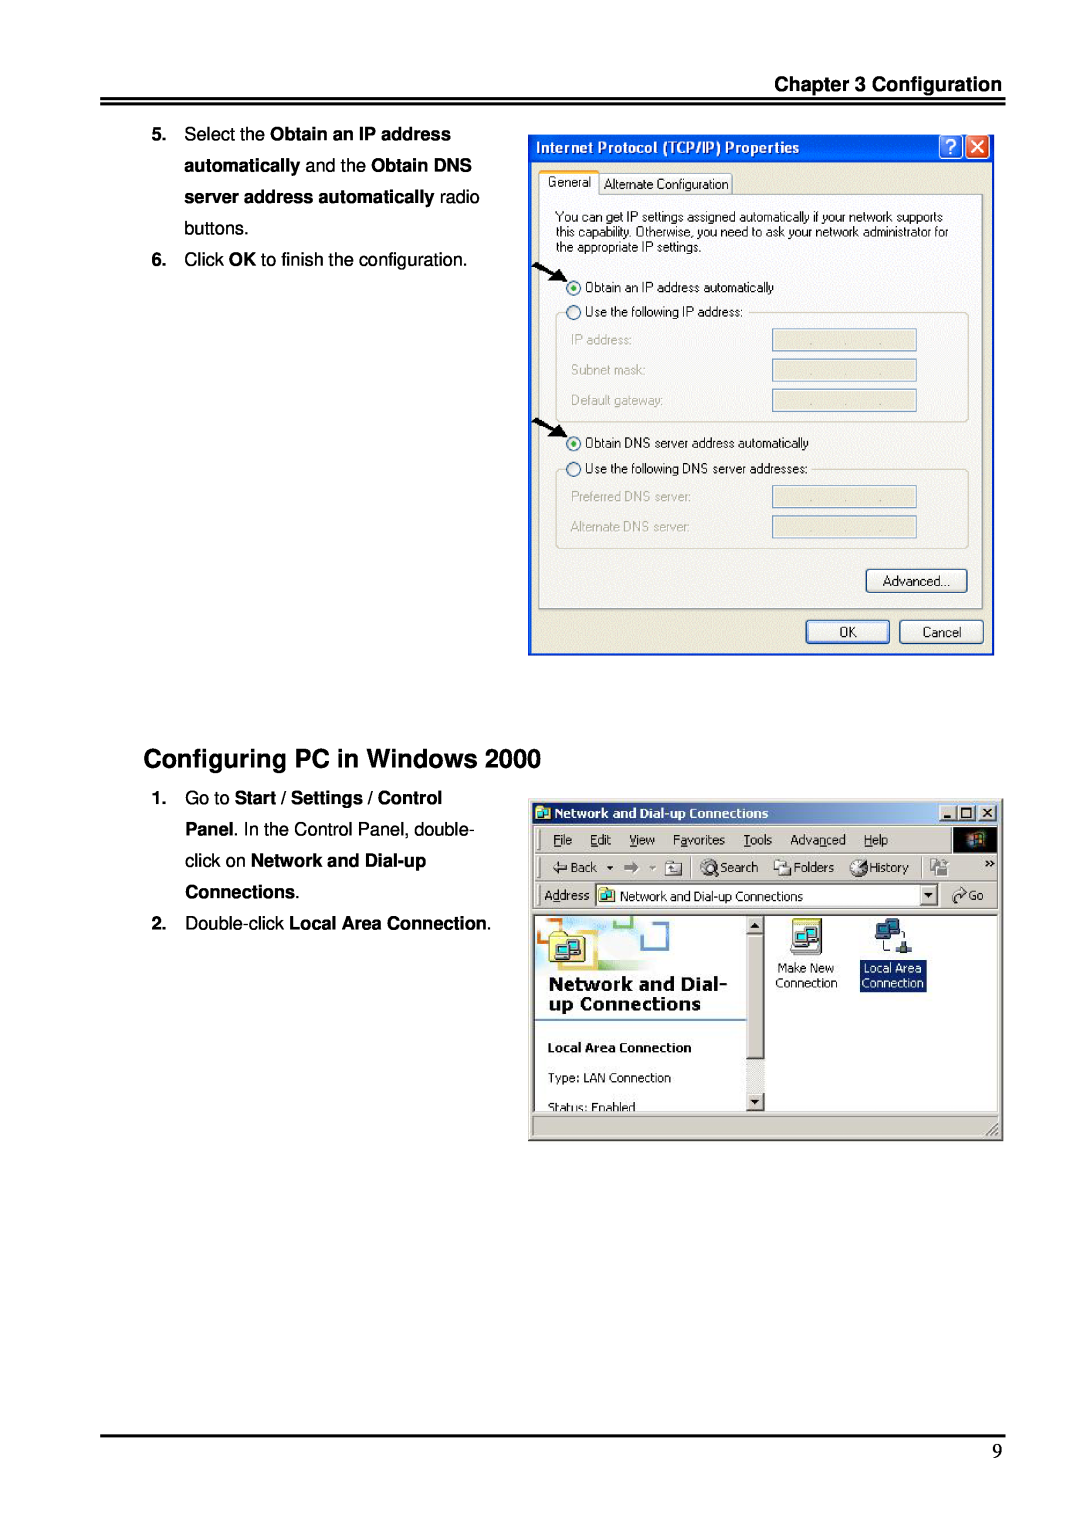 Billion Electric Company 7100S user manual Configuring PC in Windows, Configuration, Double-click Local Area Connection 